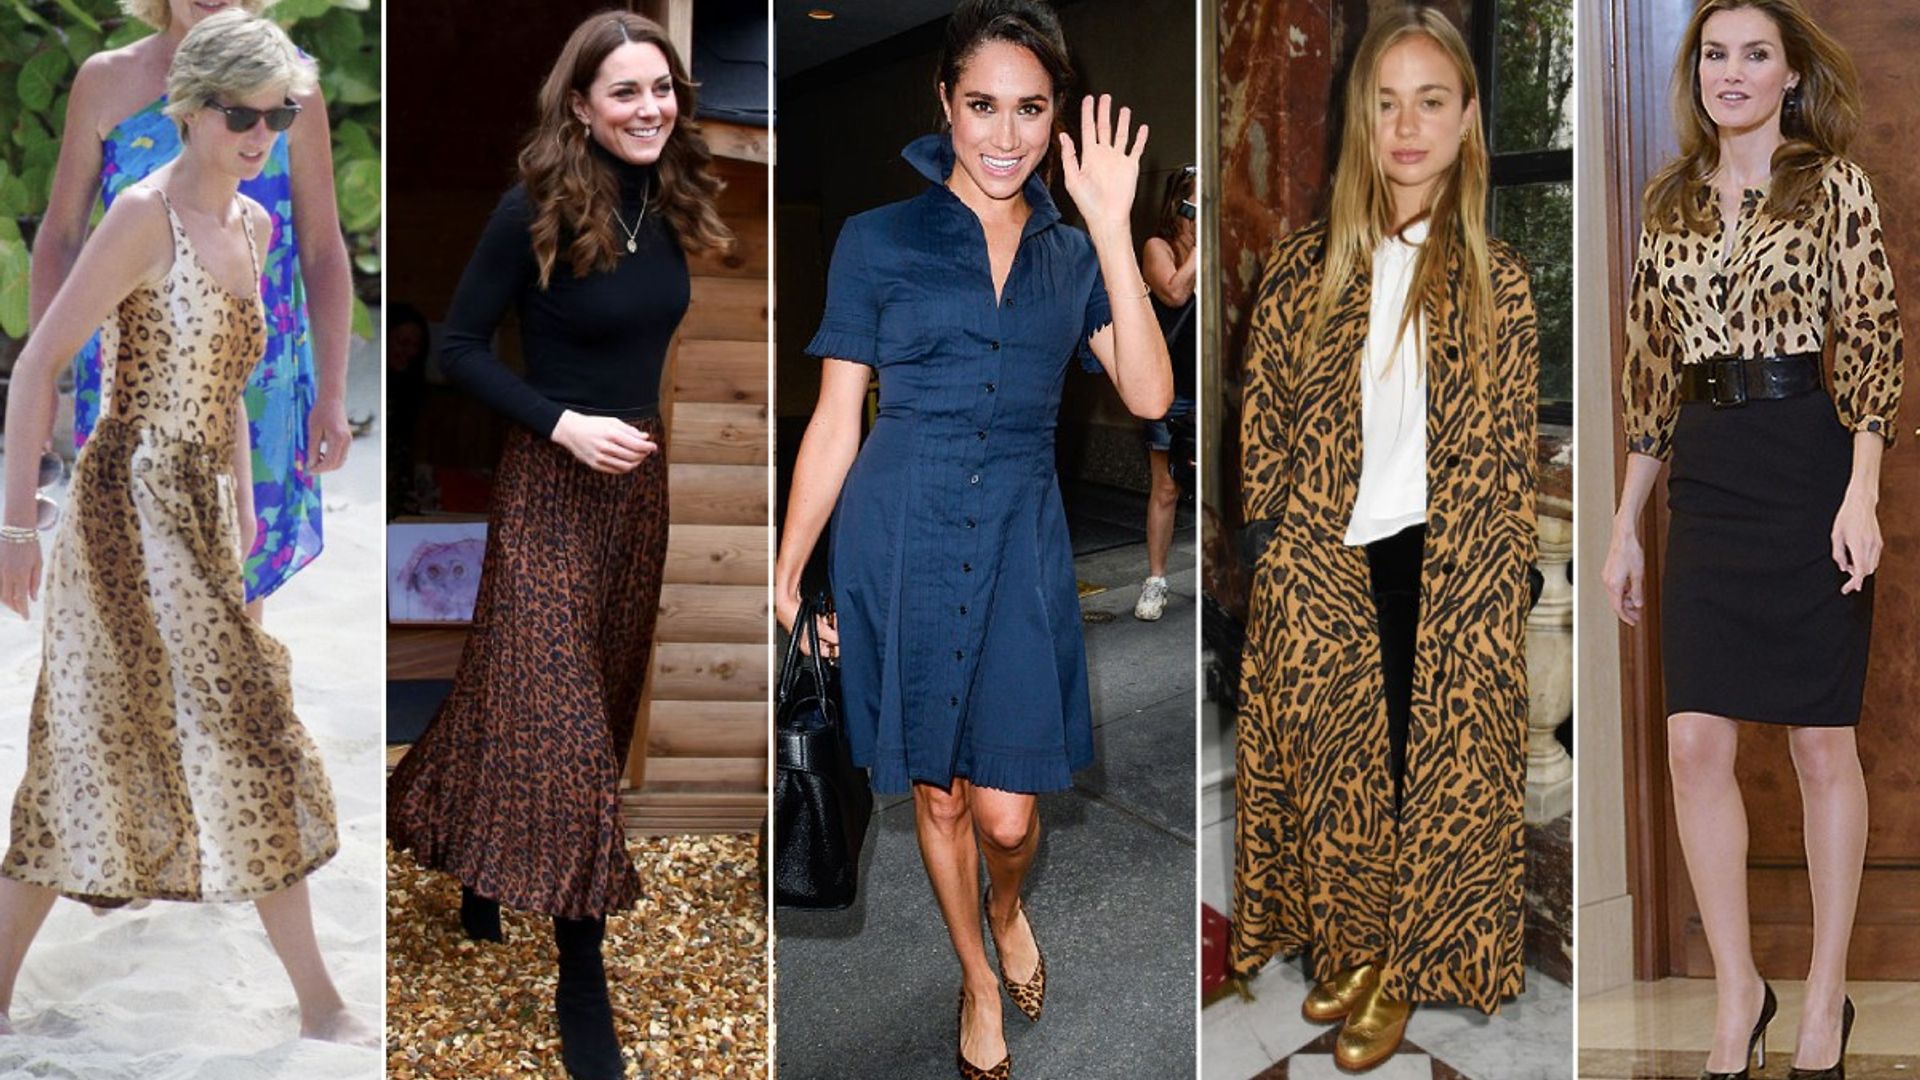 Royal ladies wearing chic leopard print outfits! From the Queen to Meghan Markle